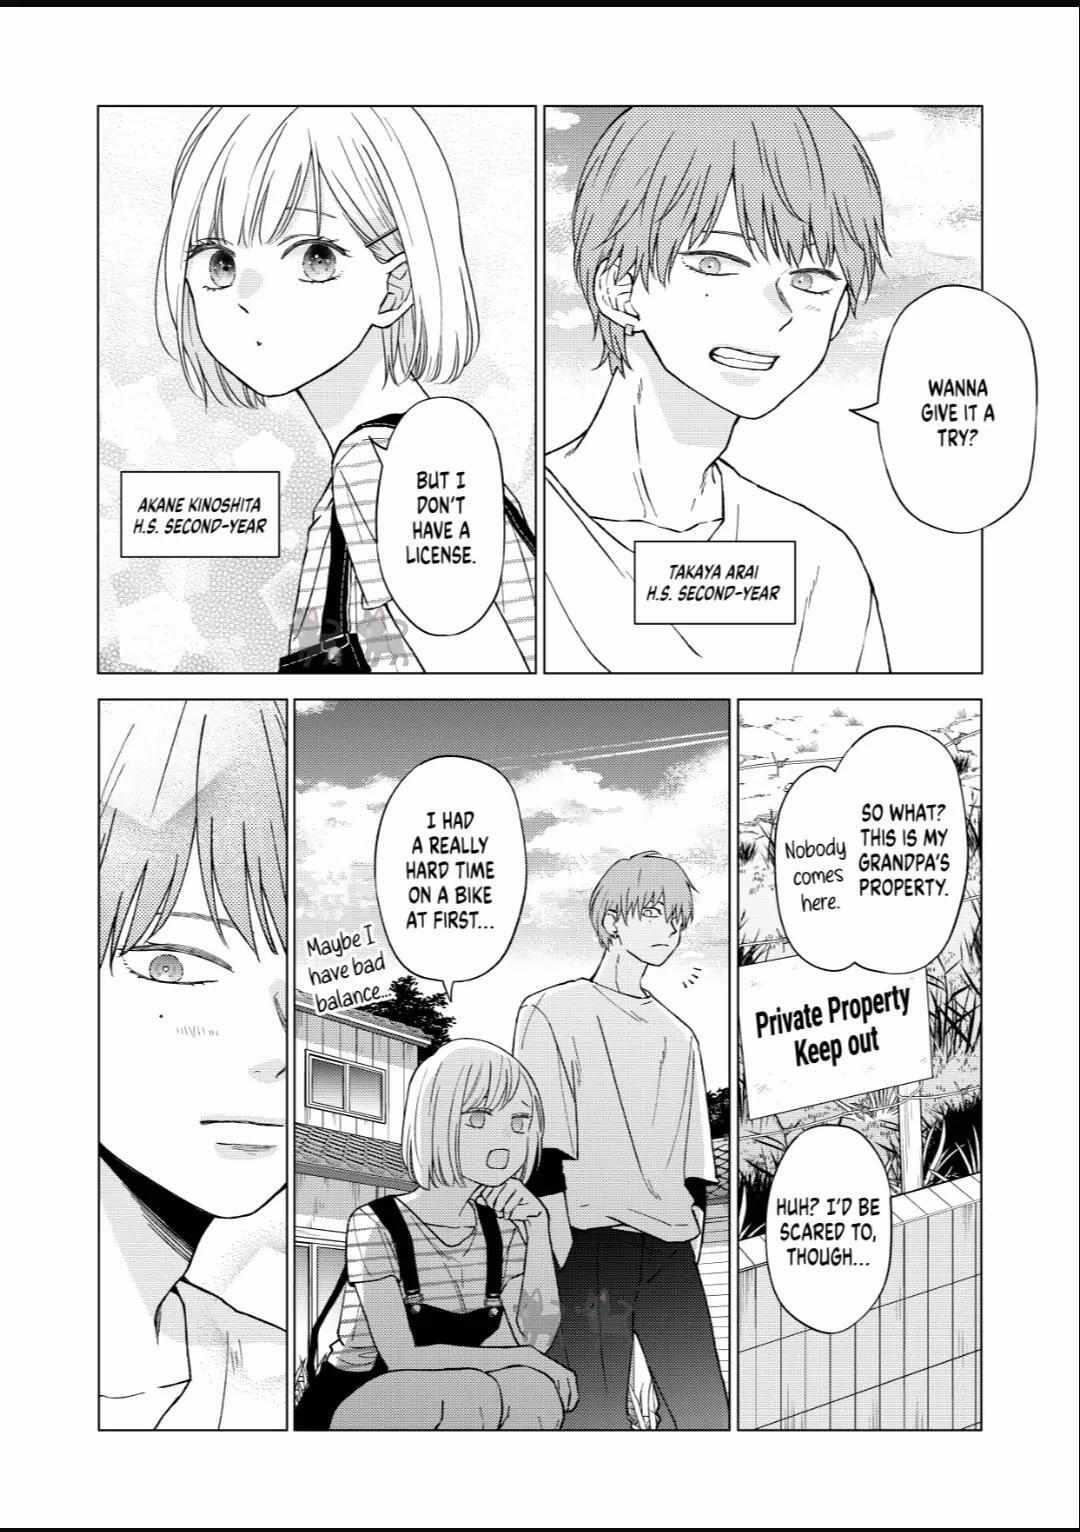 Read My Lv999 Love For Yamada-Kun Chapter 50 On, 51% OFF